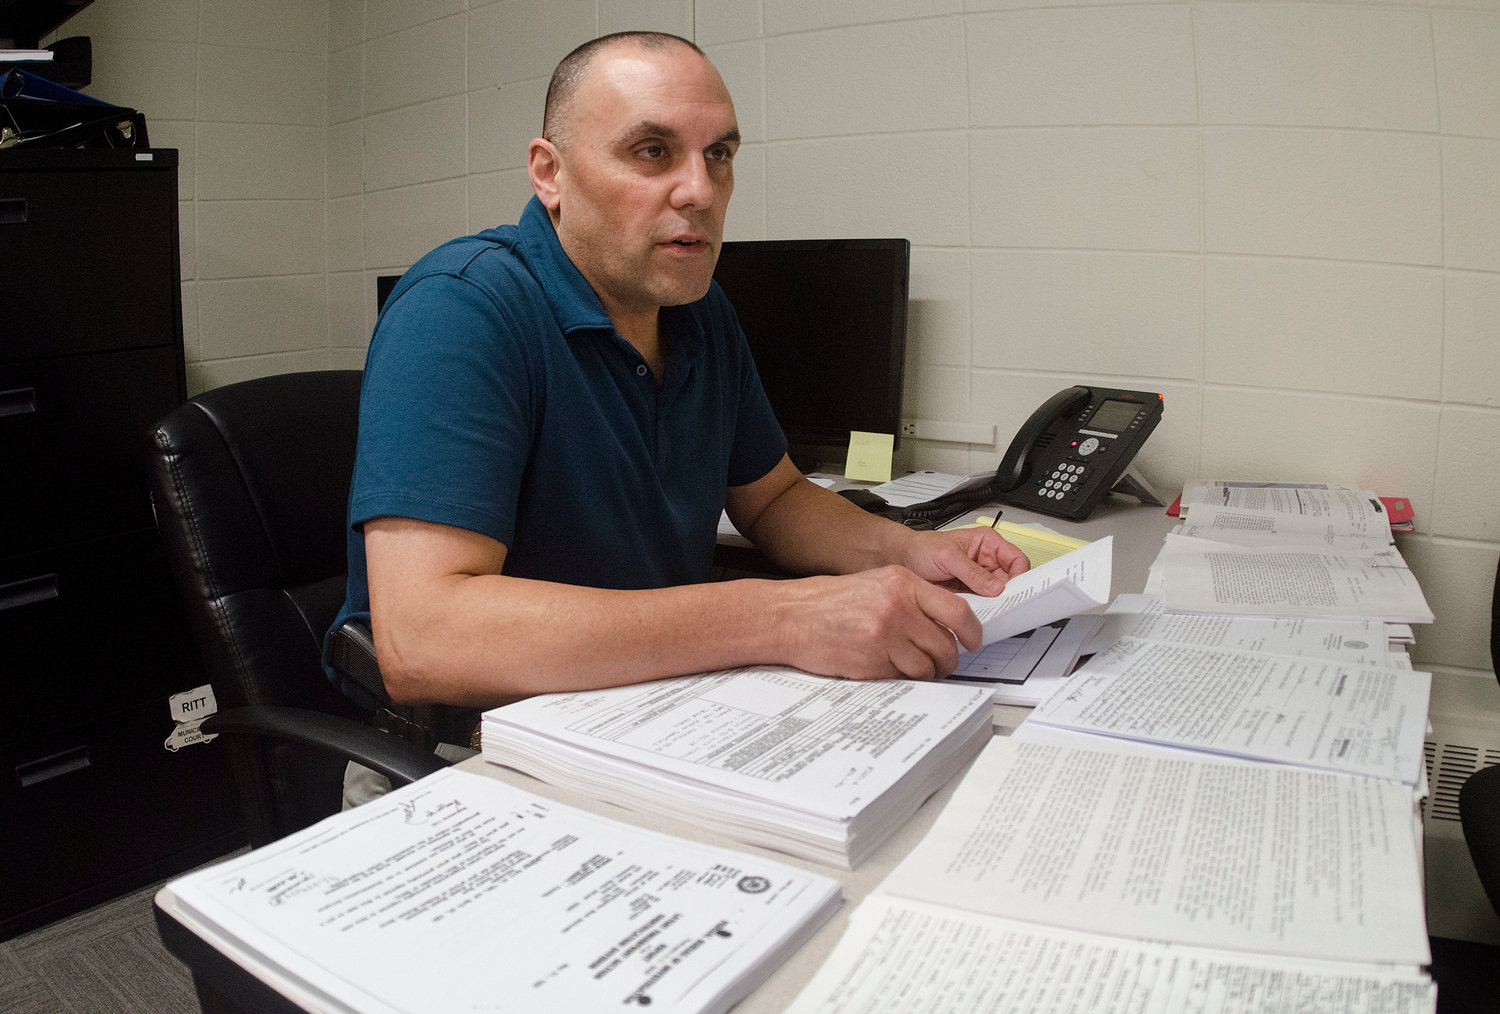 Ptlm. George Lefebvre is temporarily driving a desk instead of a cruiser, as the drop in calls permits him to turn his attention to the department’s cold case files.